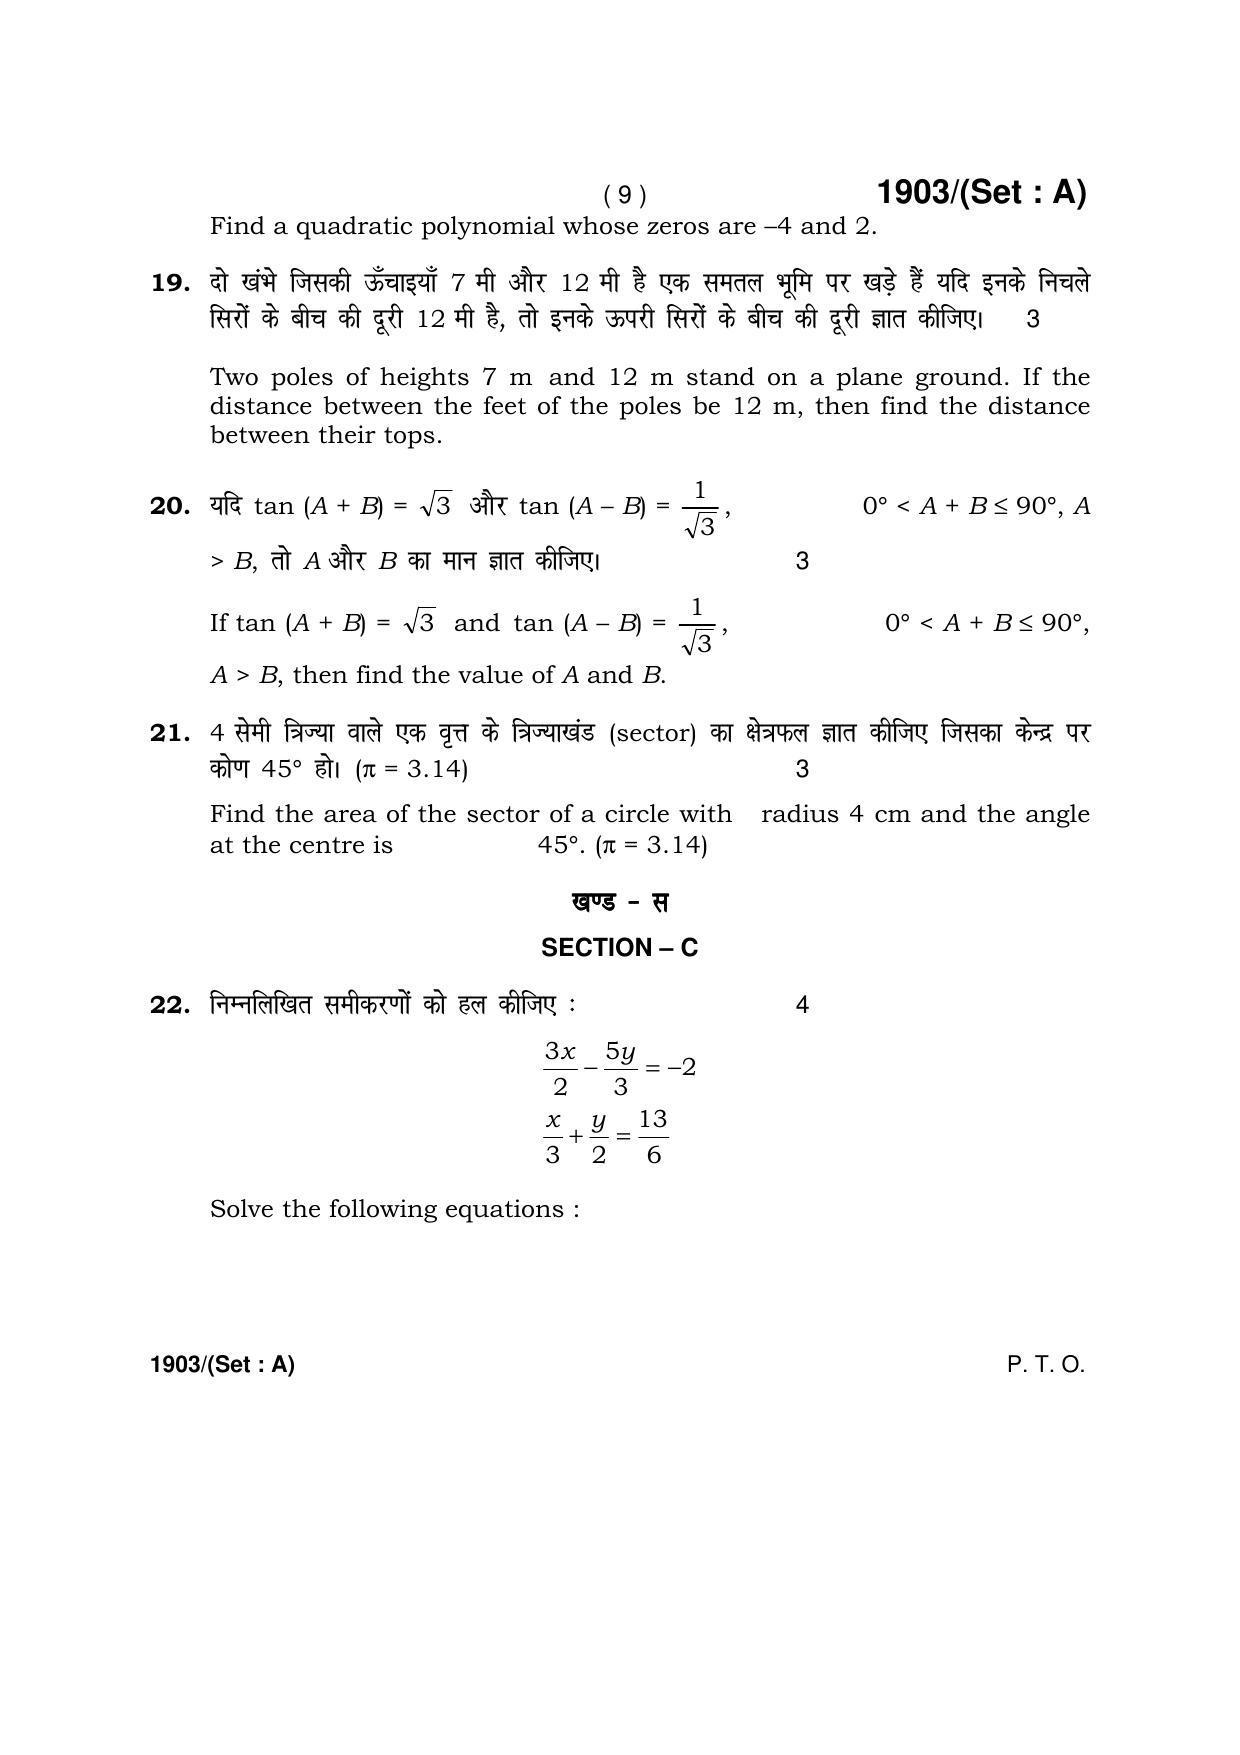 Haryana Board HBSE Class 10 Mathematics -A 2017 Question Paper - Page 9